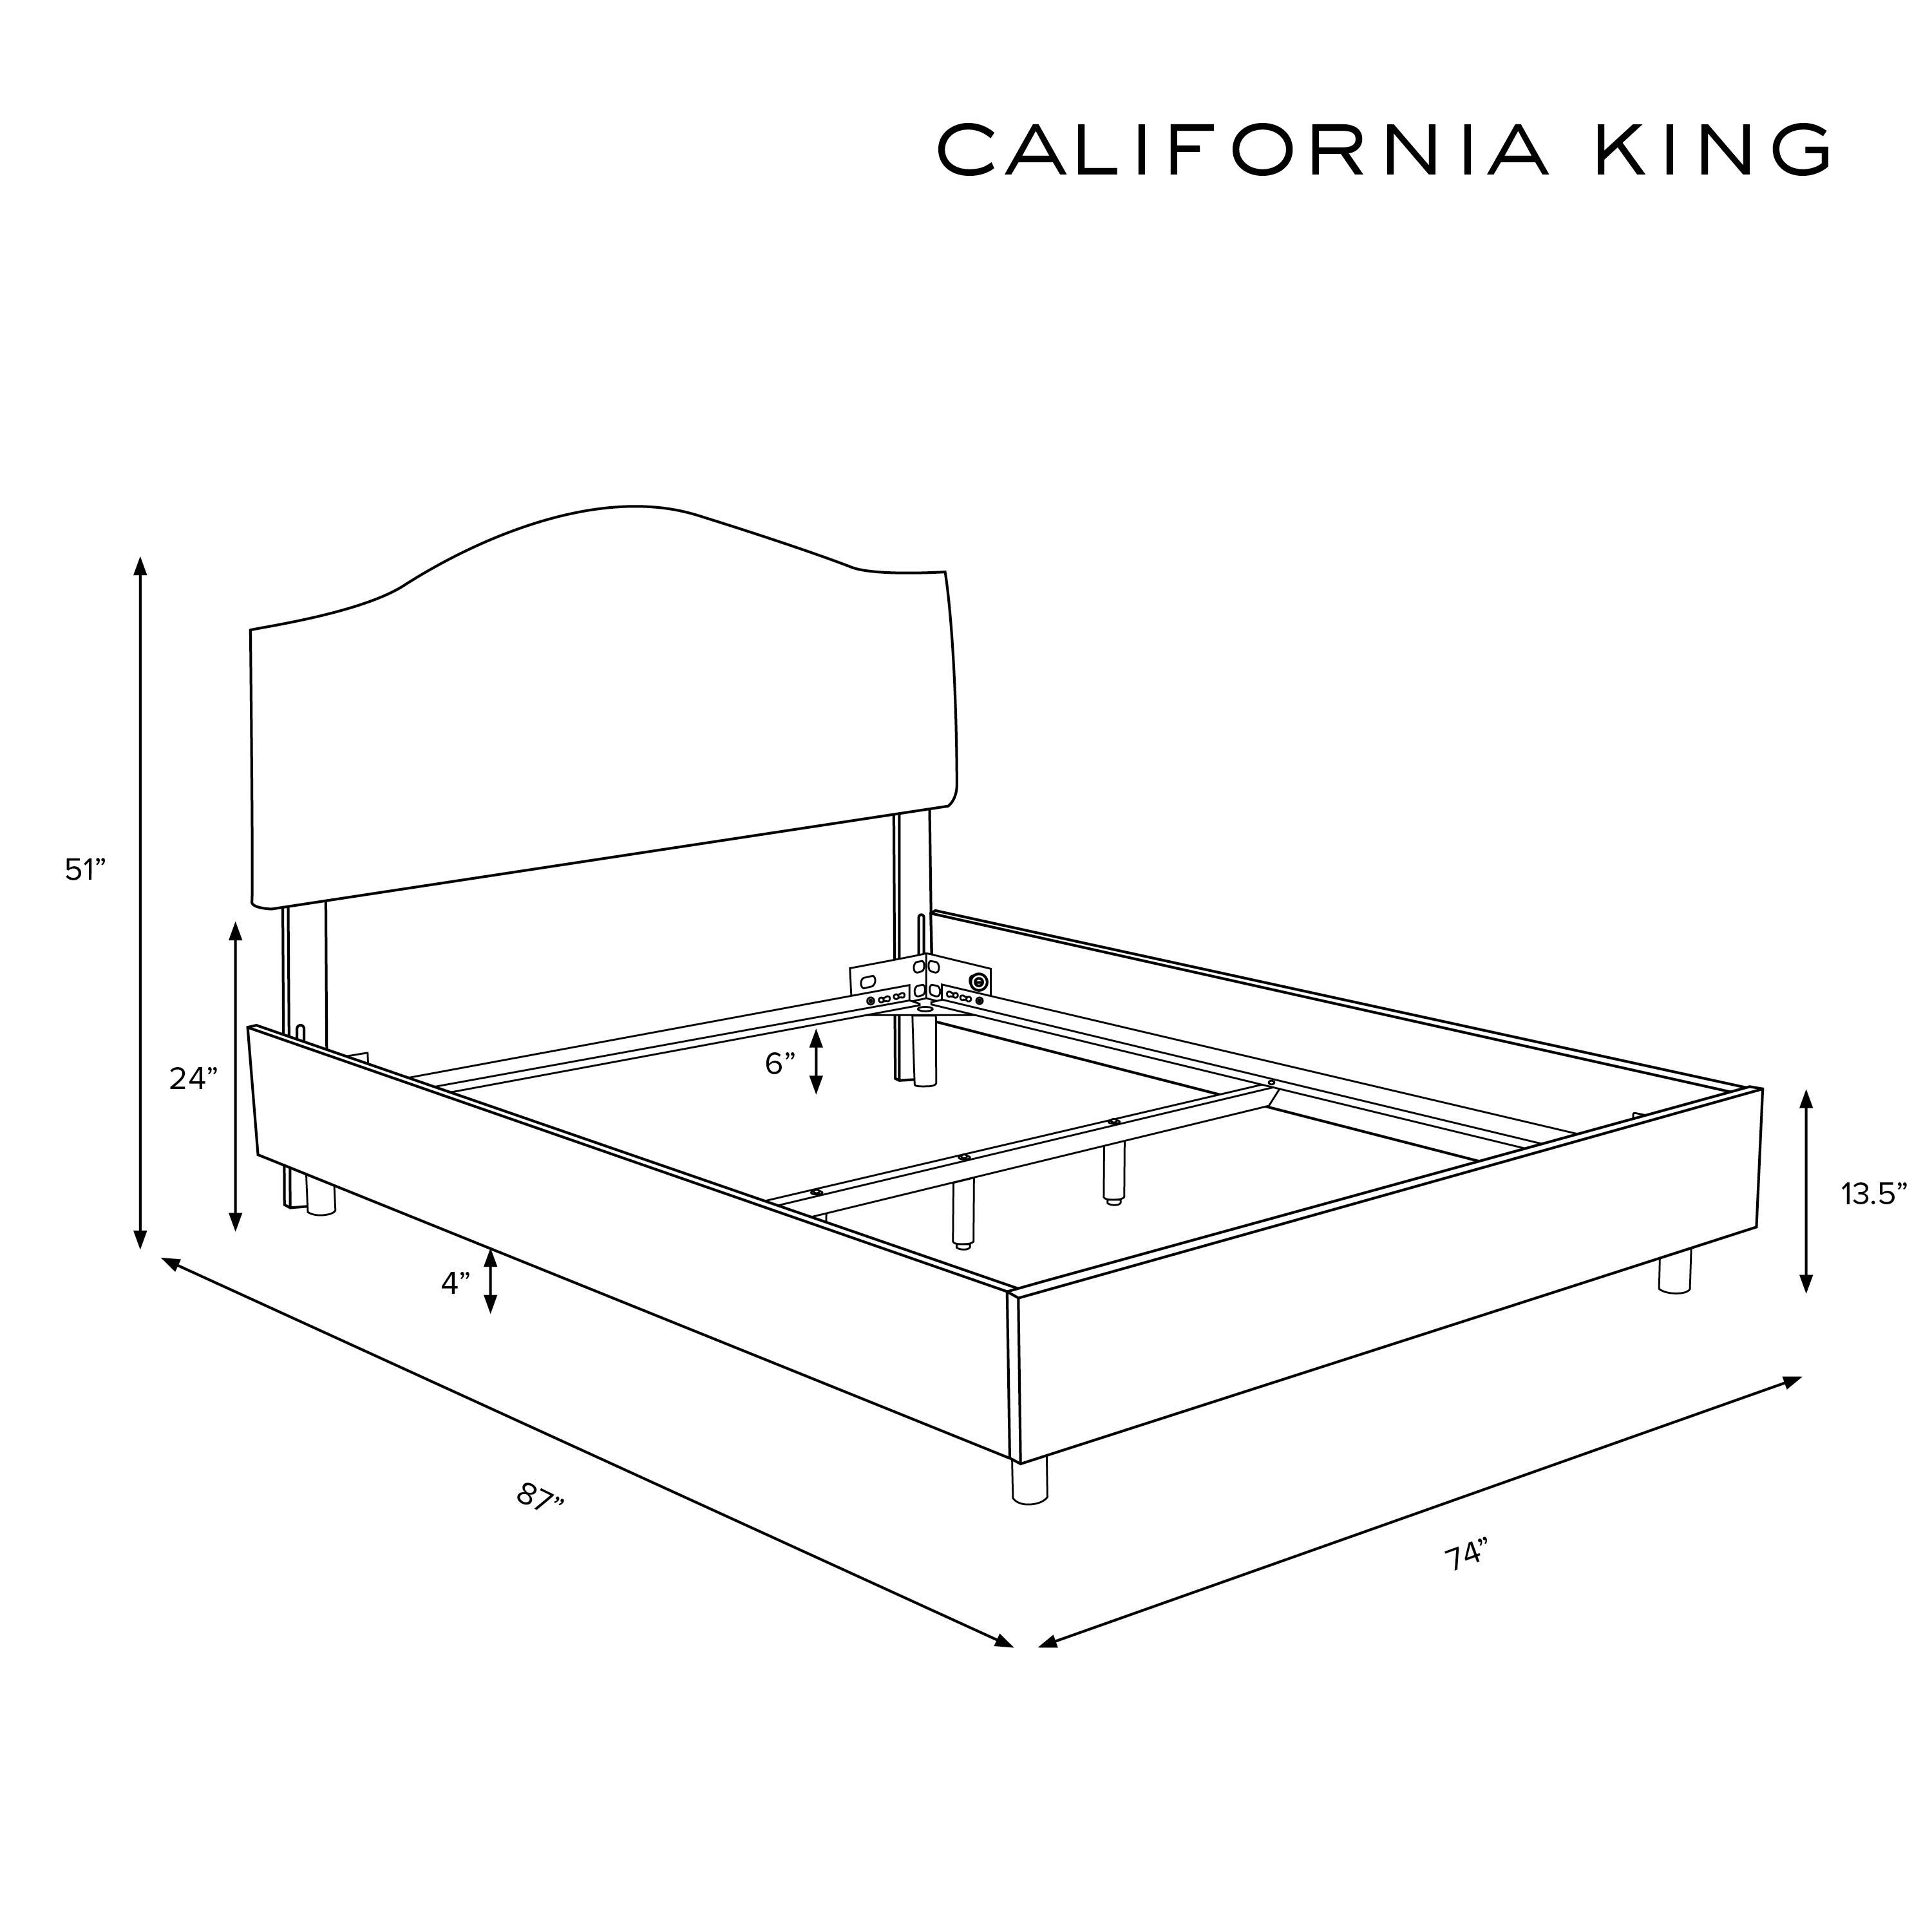 California King Kenmore Bed in Linen Talc - Image 5